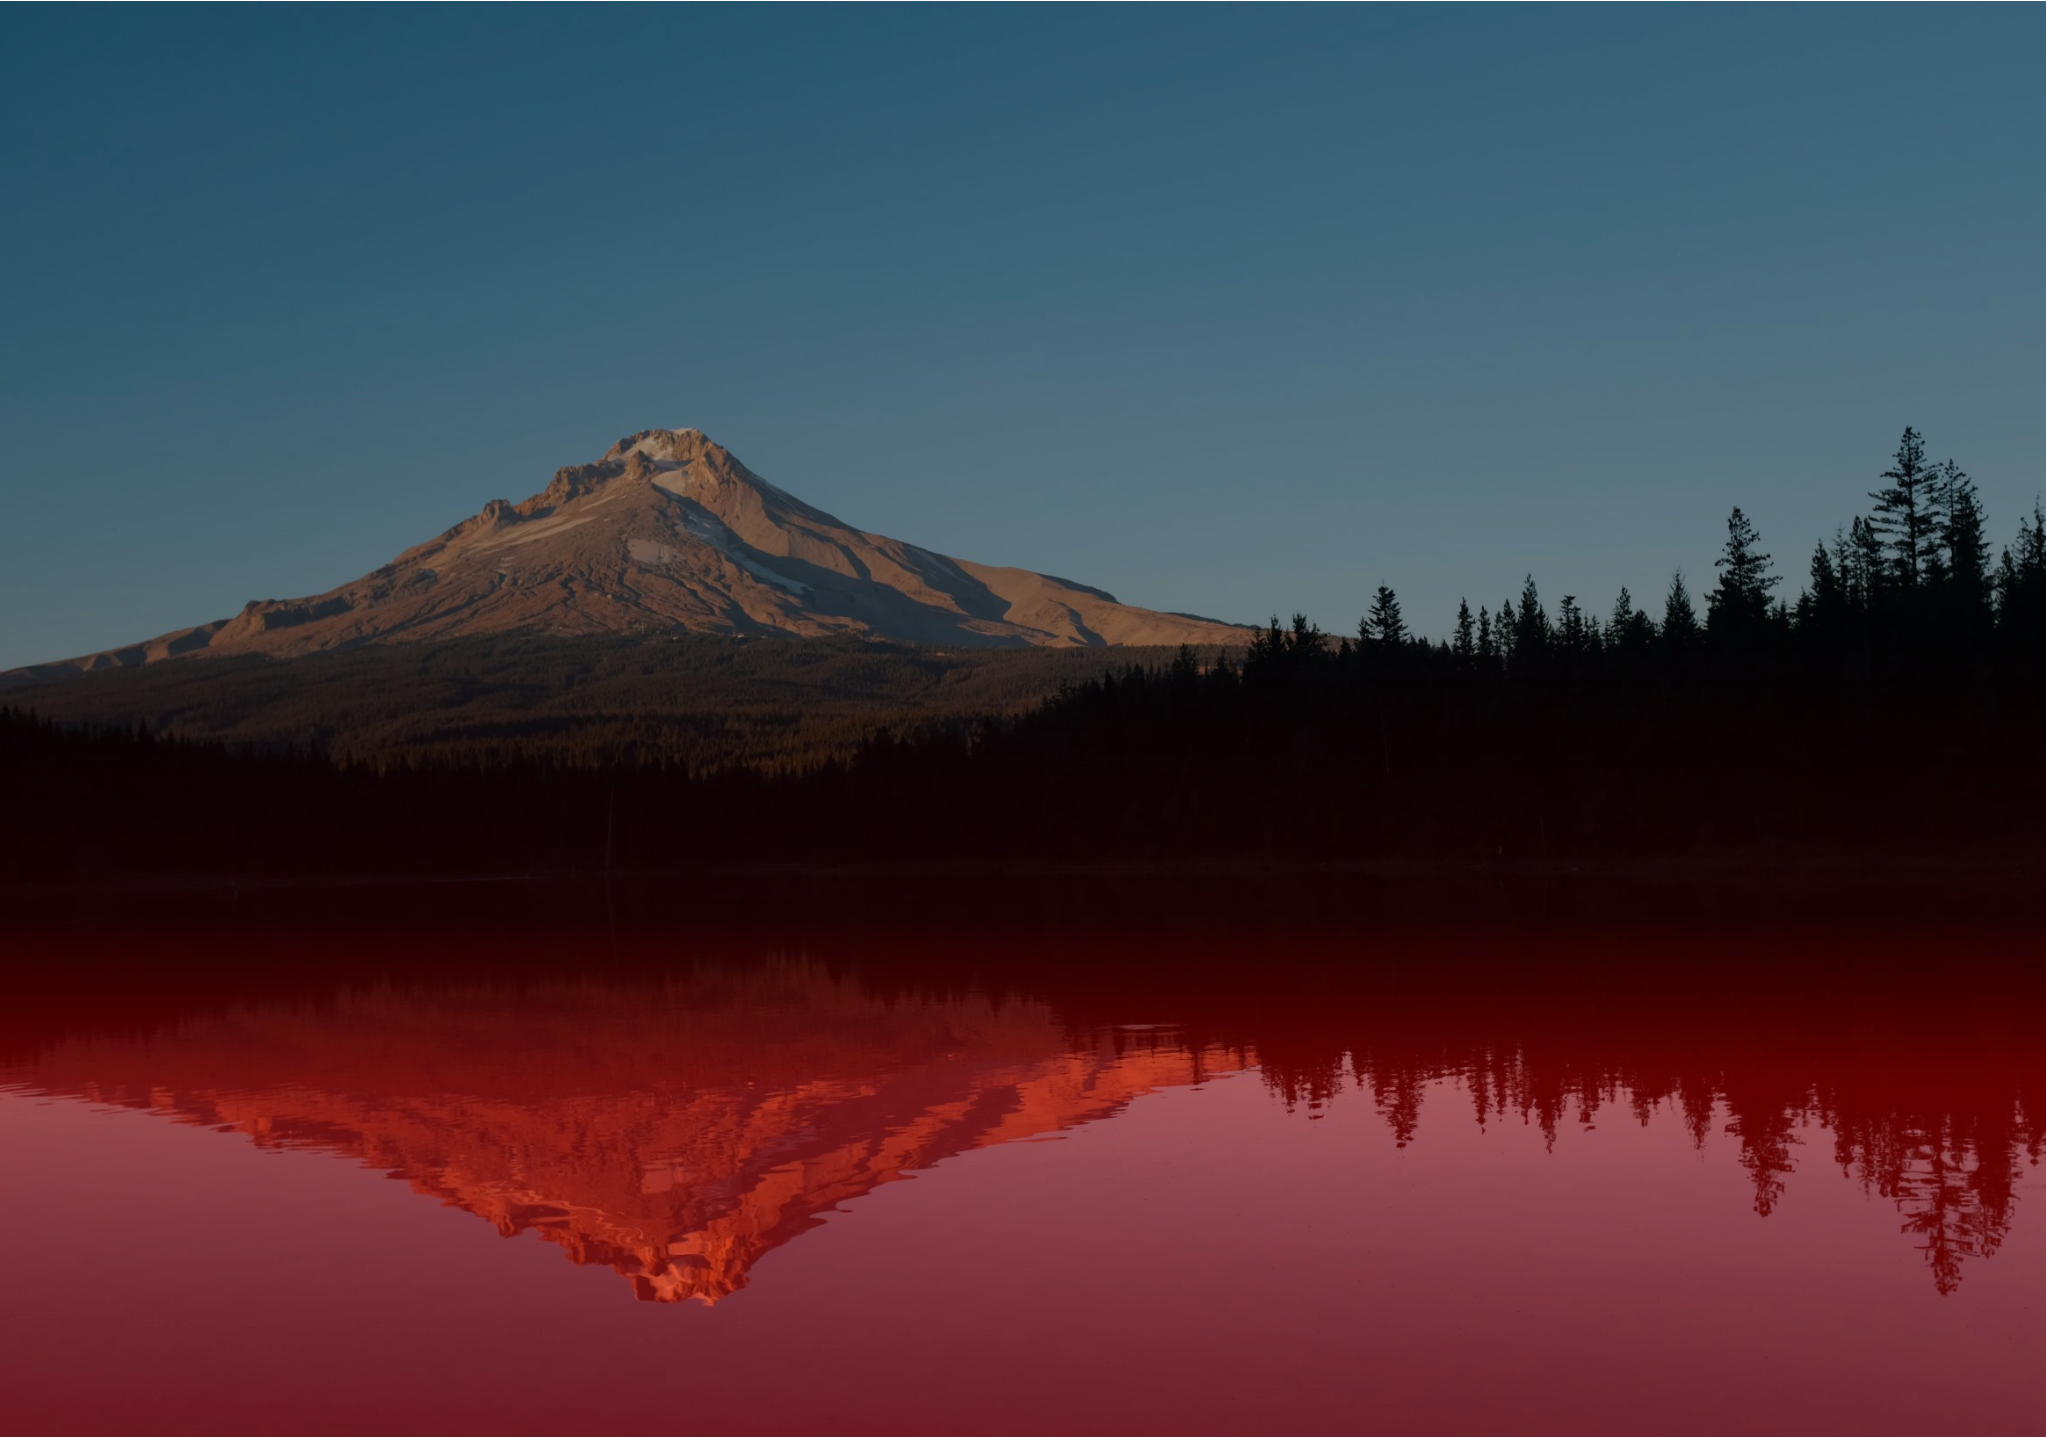 Image of a mountain with a reflection across a lake that glows red.